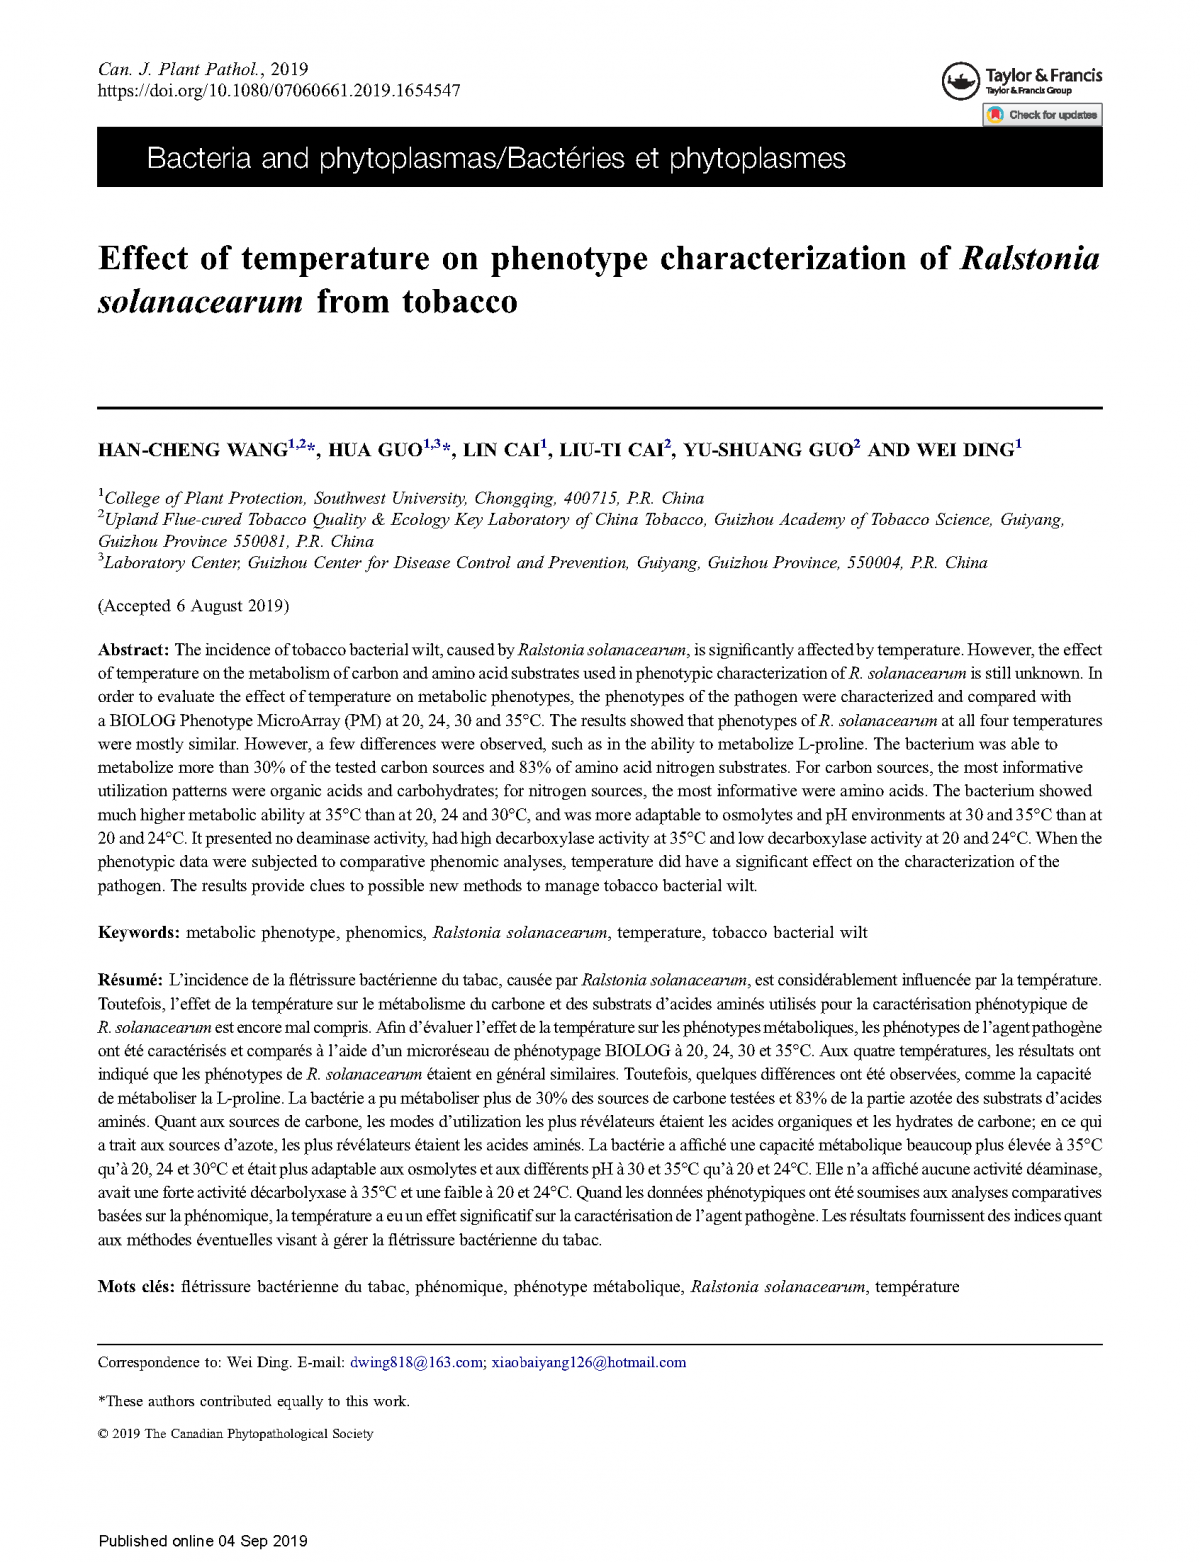 Effect of temperature on phenotype characterization of Ralstonia solanacearum from tobacco